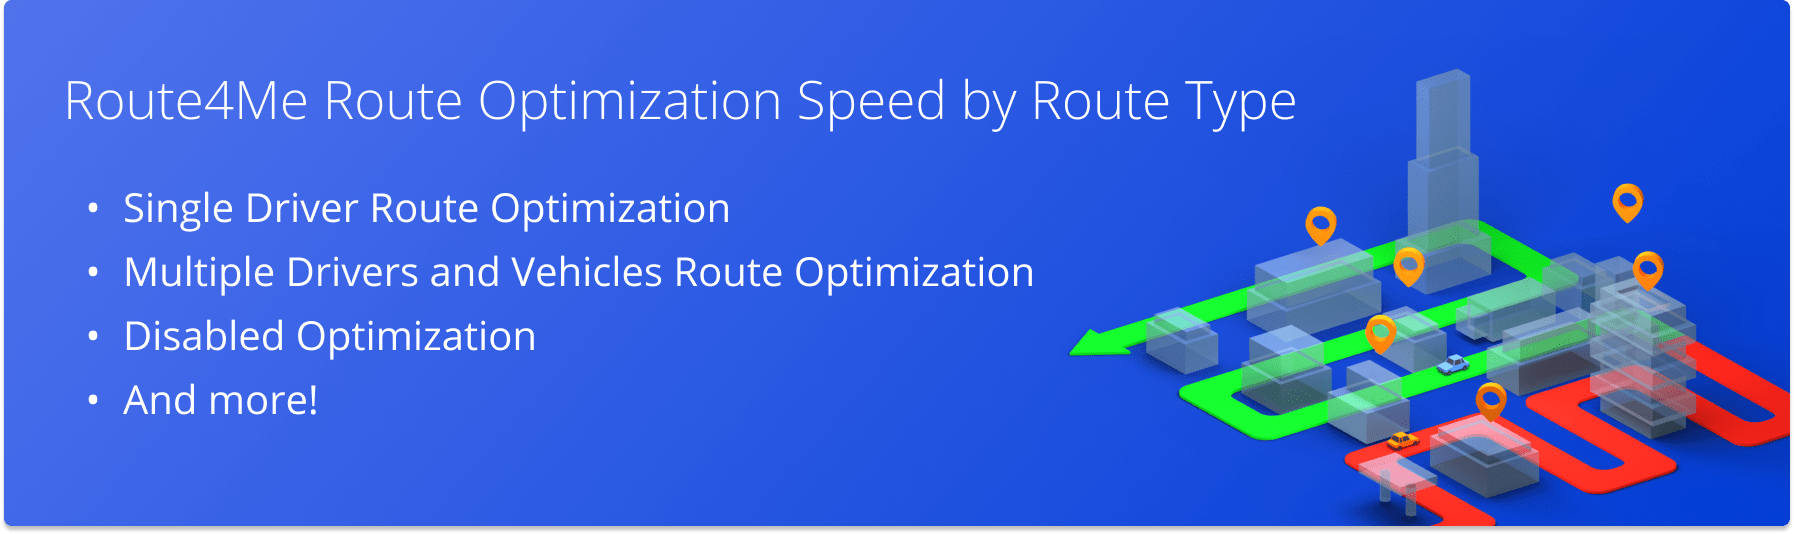 Route4Me Route Optimization Speed by Route Type